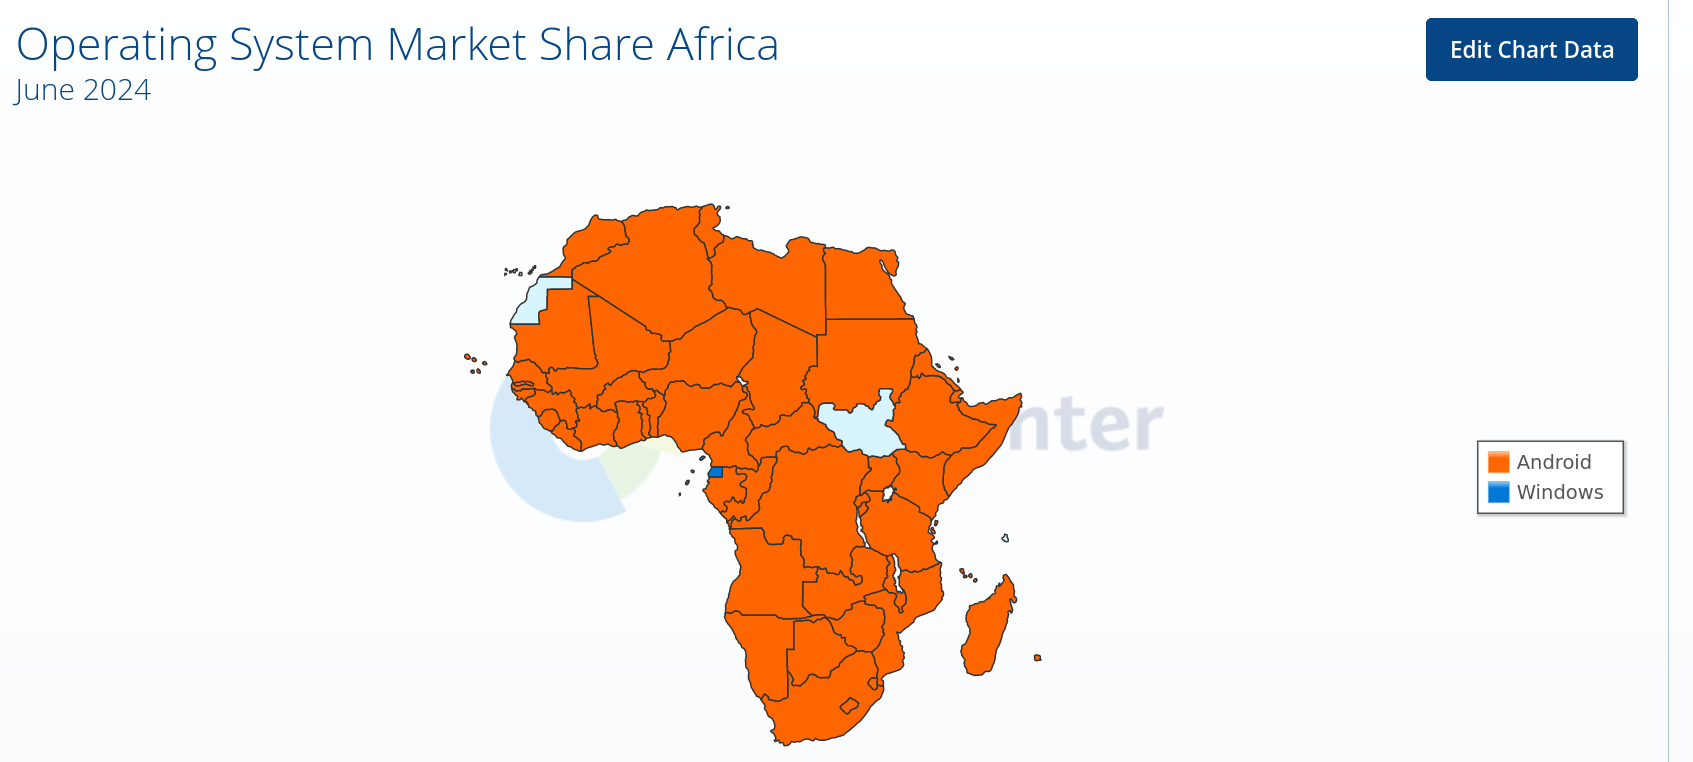 Operating System Market Share Africa in June 2024